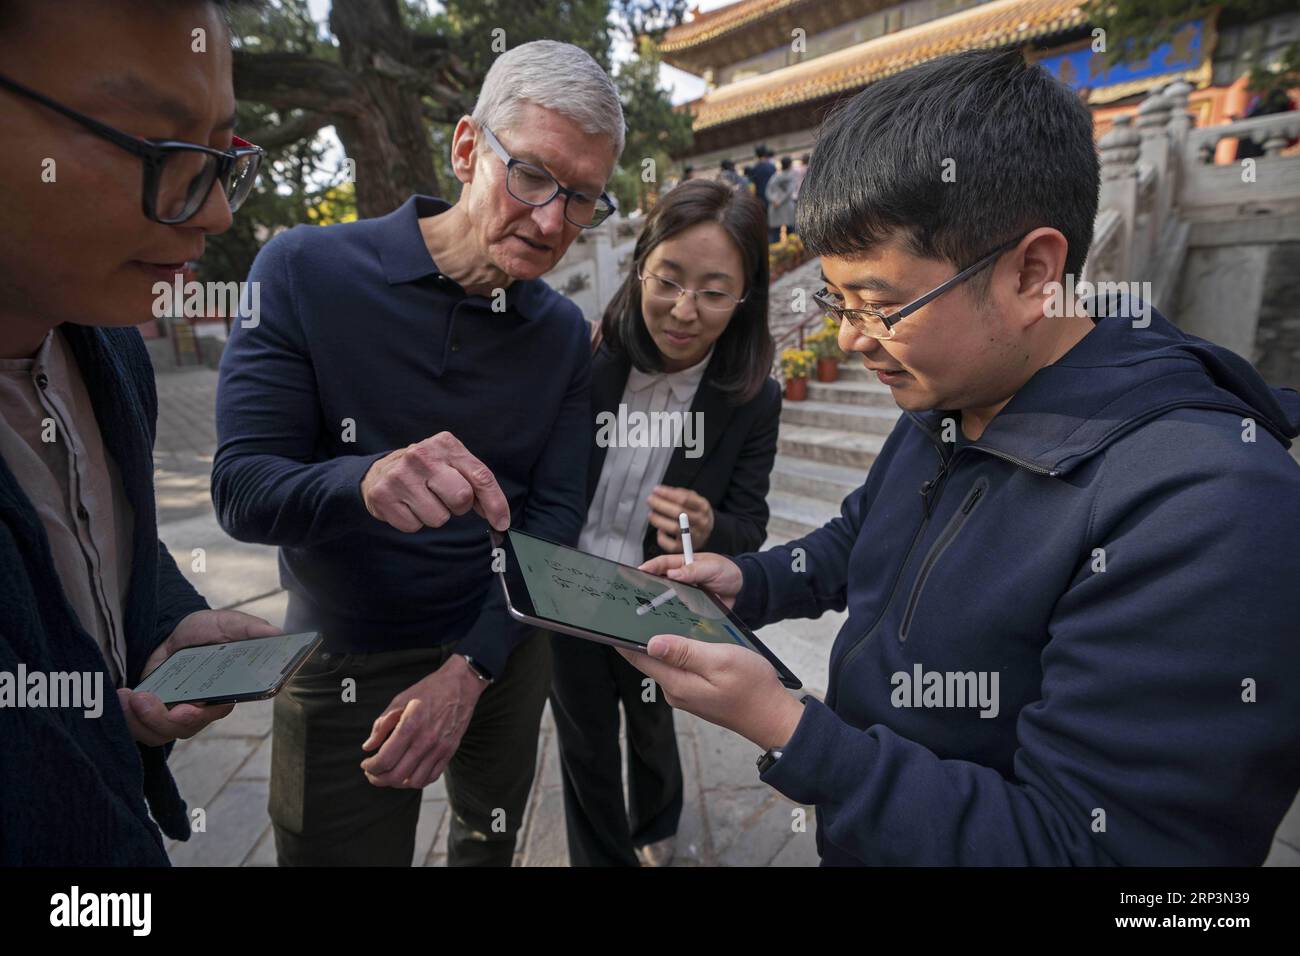 (181011) -- BEIJING, Oct. 11, 2018 -- Liu Zhipeng (1st R), one of the founders of Xichuangzhu APP, shows Apple s CEO Tim Cook (2nd L) how to write calligraphy on iPad with Apple Pencil at Beijing Confucian Temple in Beijing, capital of China, on Oct. 10, 2018. Cook paid a visit to Beijing Confucian Temple and the Imperial College on Wednesday. ) (sxk) CHINA-BEIJING-APPLE CEO-COOK-VISIT (CN) CaixYang PUBLICATIONxNOTxINxCHN Stock Photo